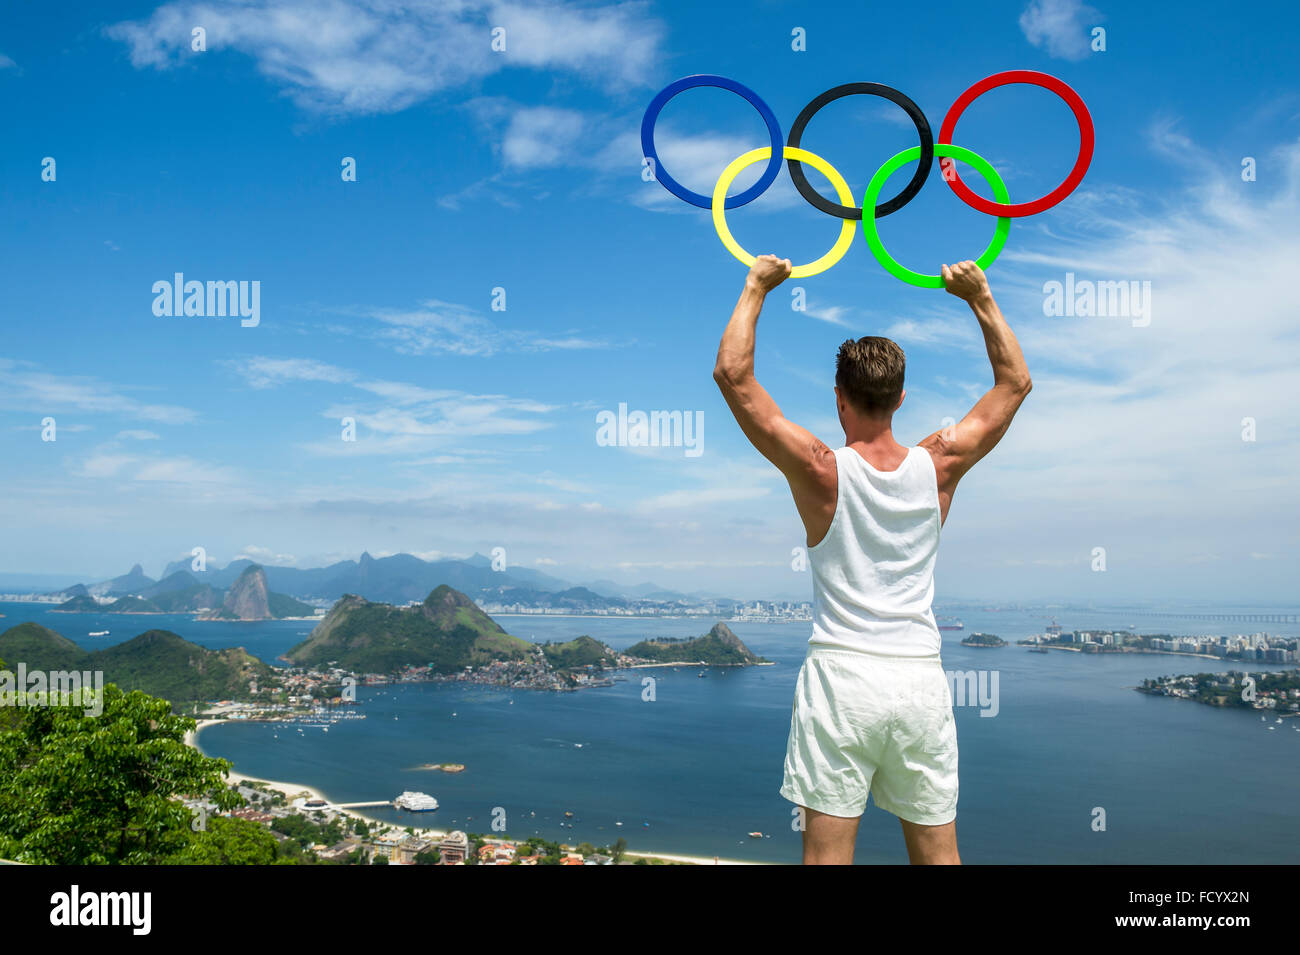 RIO DE JANEIRO - OCTOBER 24, 2015: Athlete holds Olympic rings under bright blue sky above the city skyline. Stock Photo